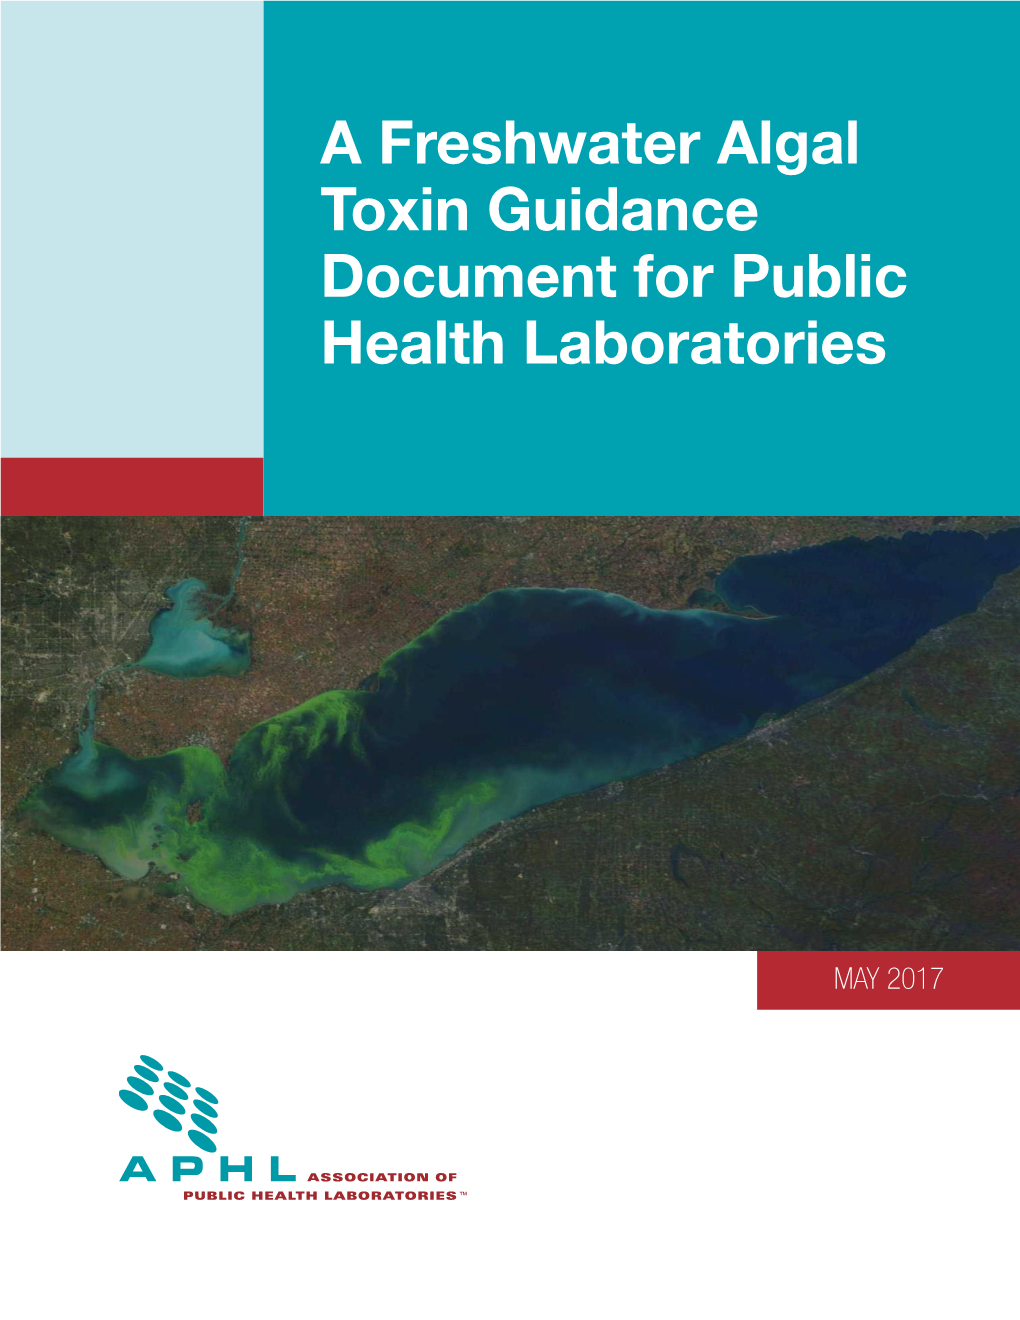 A Freshwater Algal Toxin Guidance Document for Public Health Laboratories